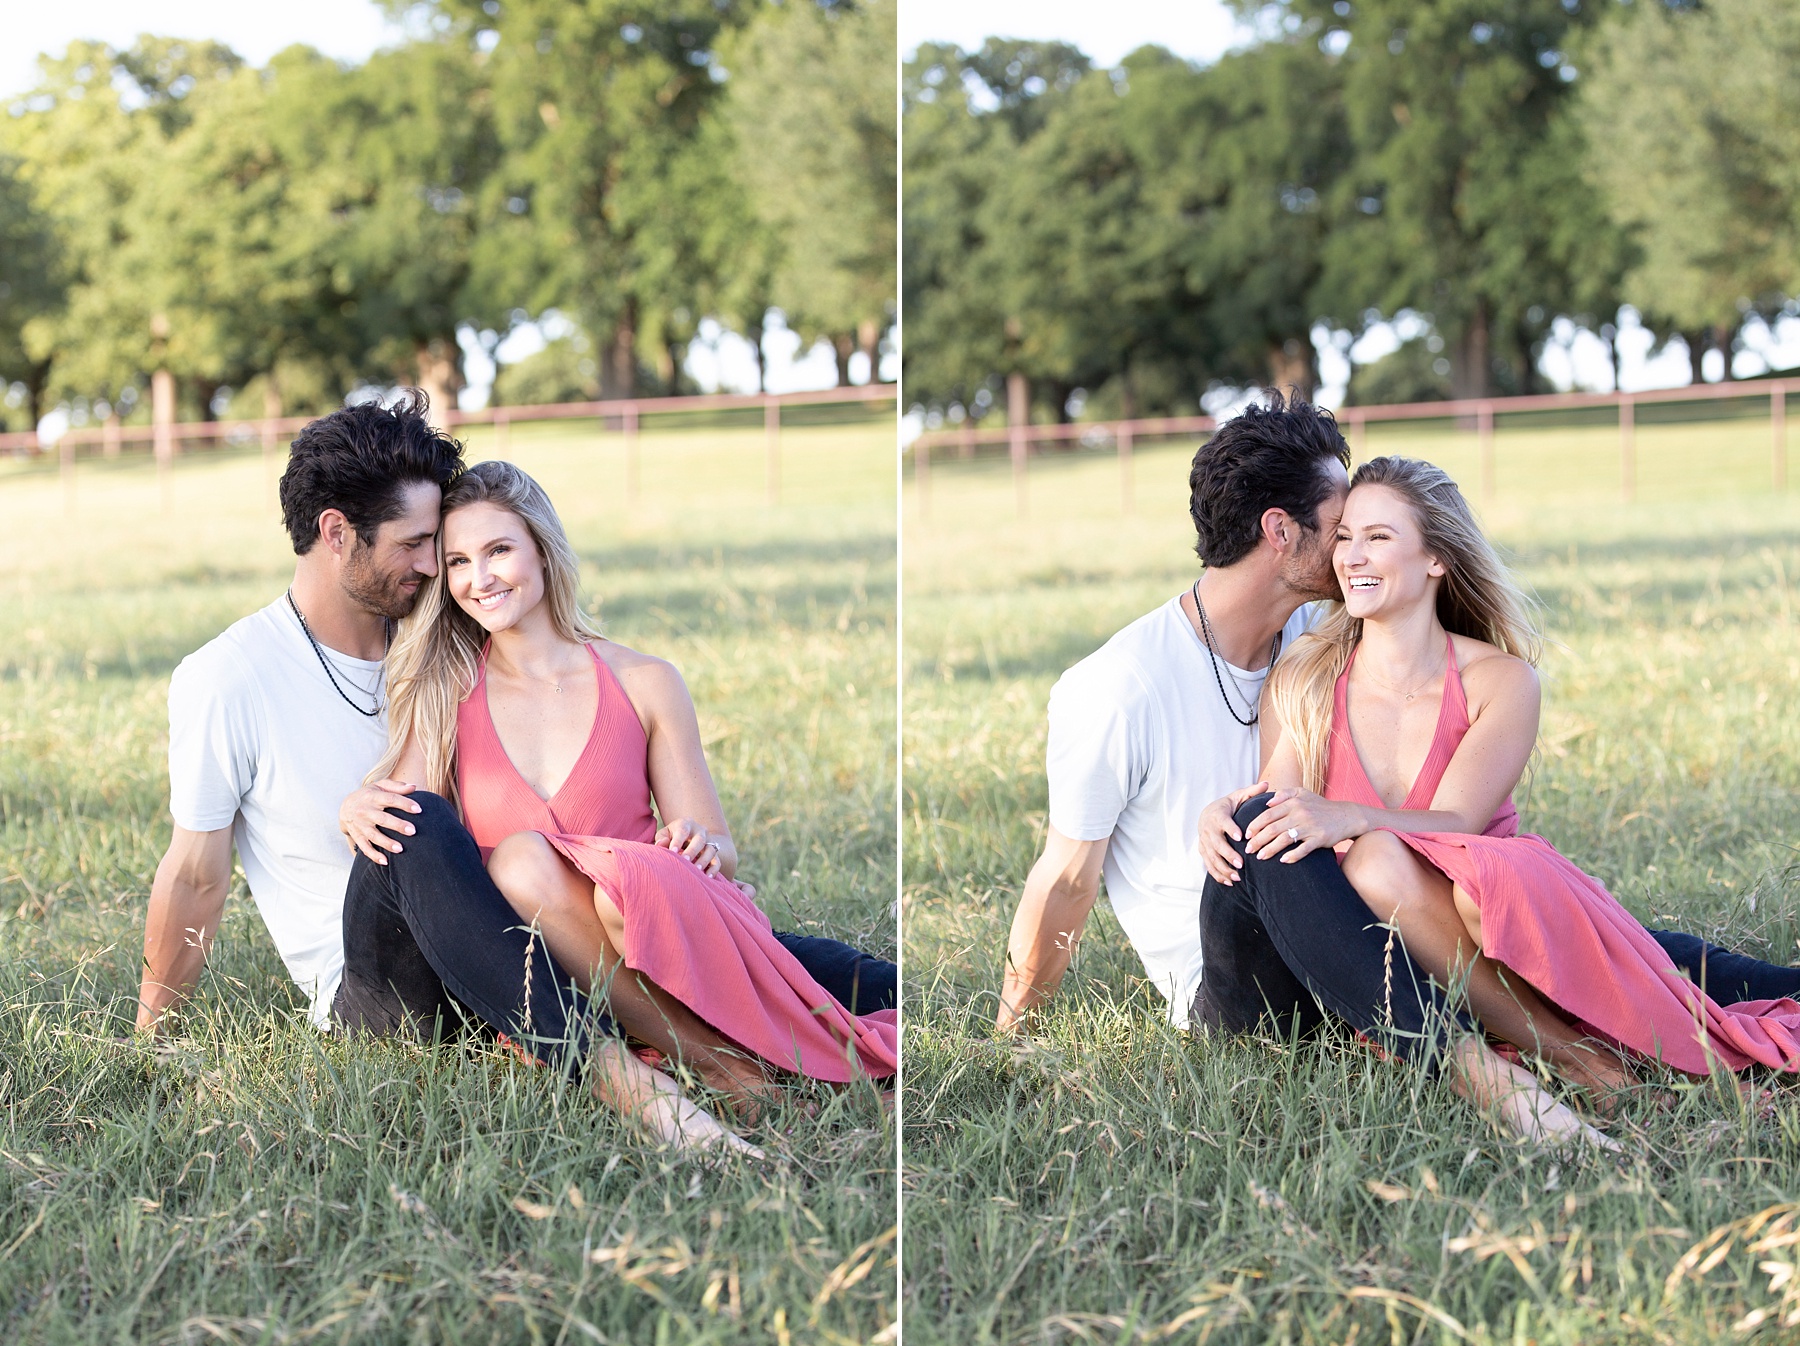 Southlake TX engagement session photographed by Randi Michelle